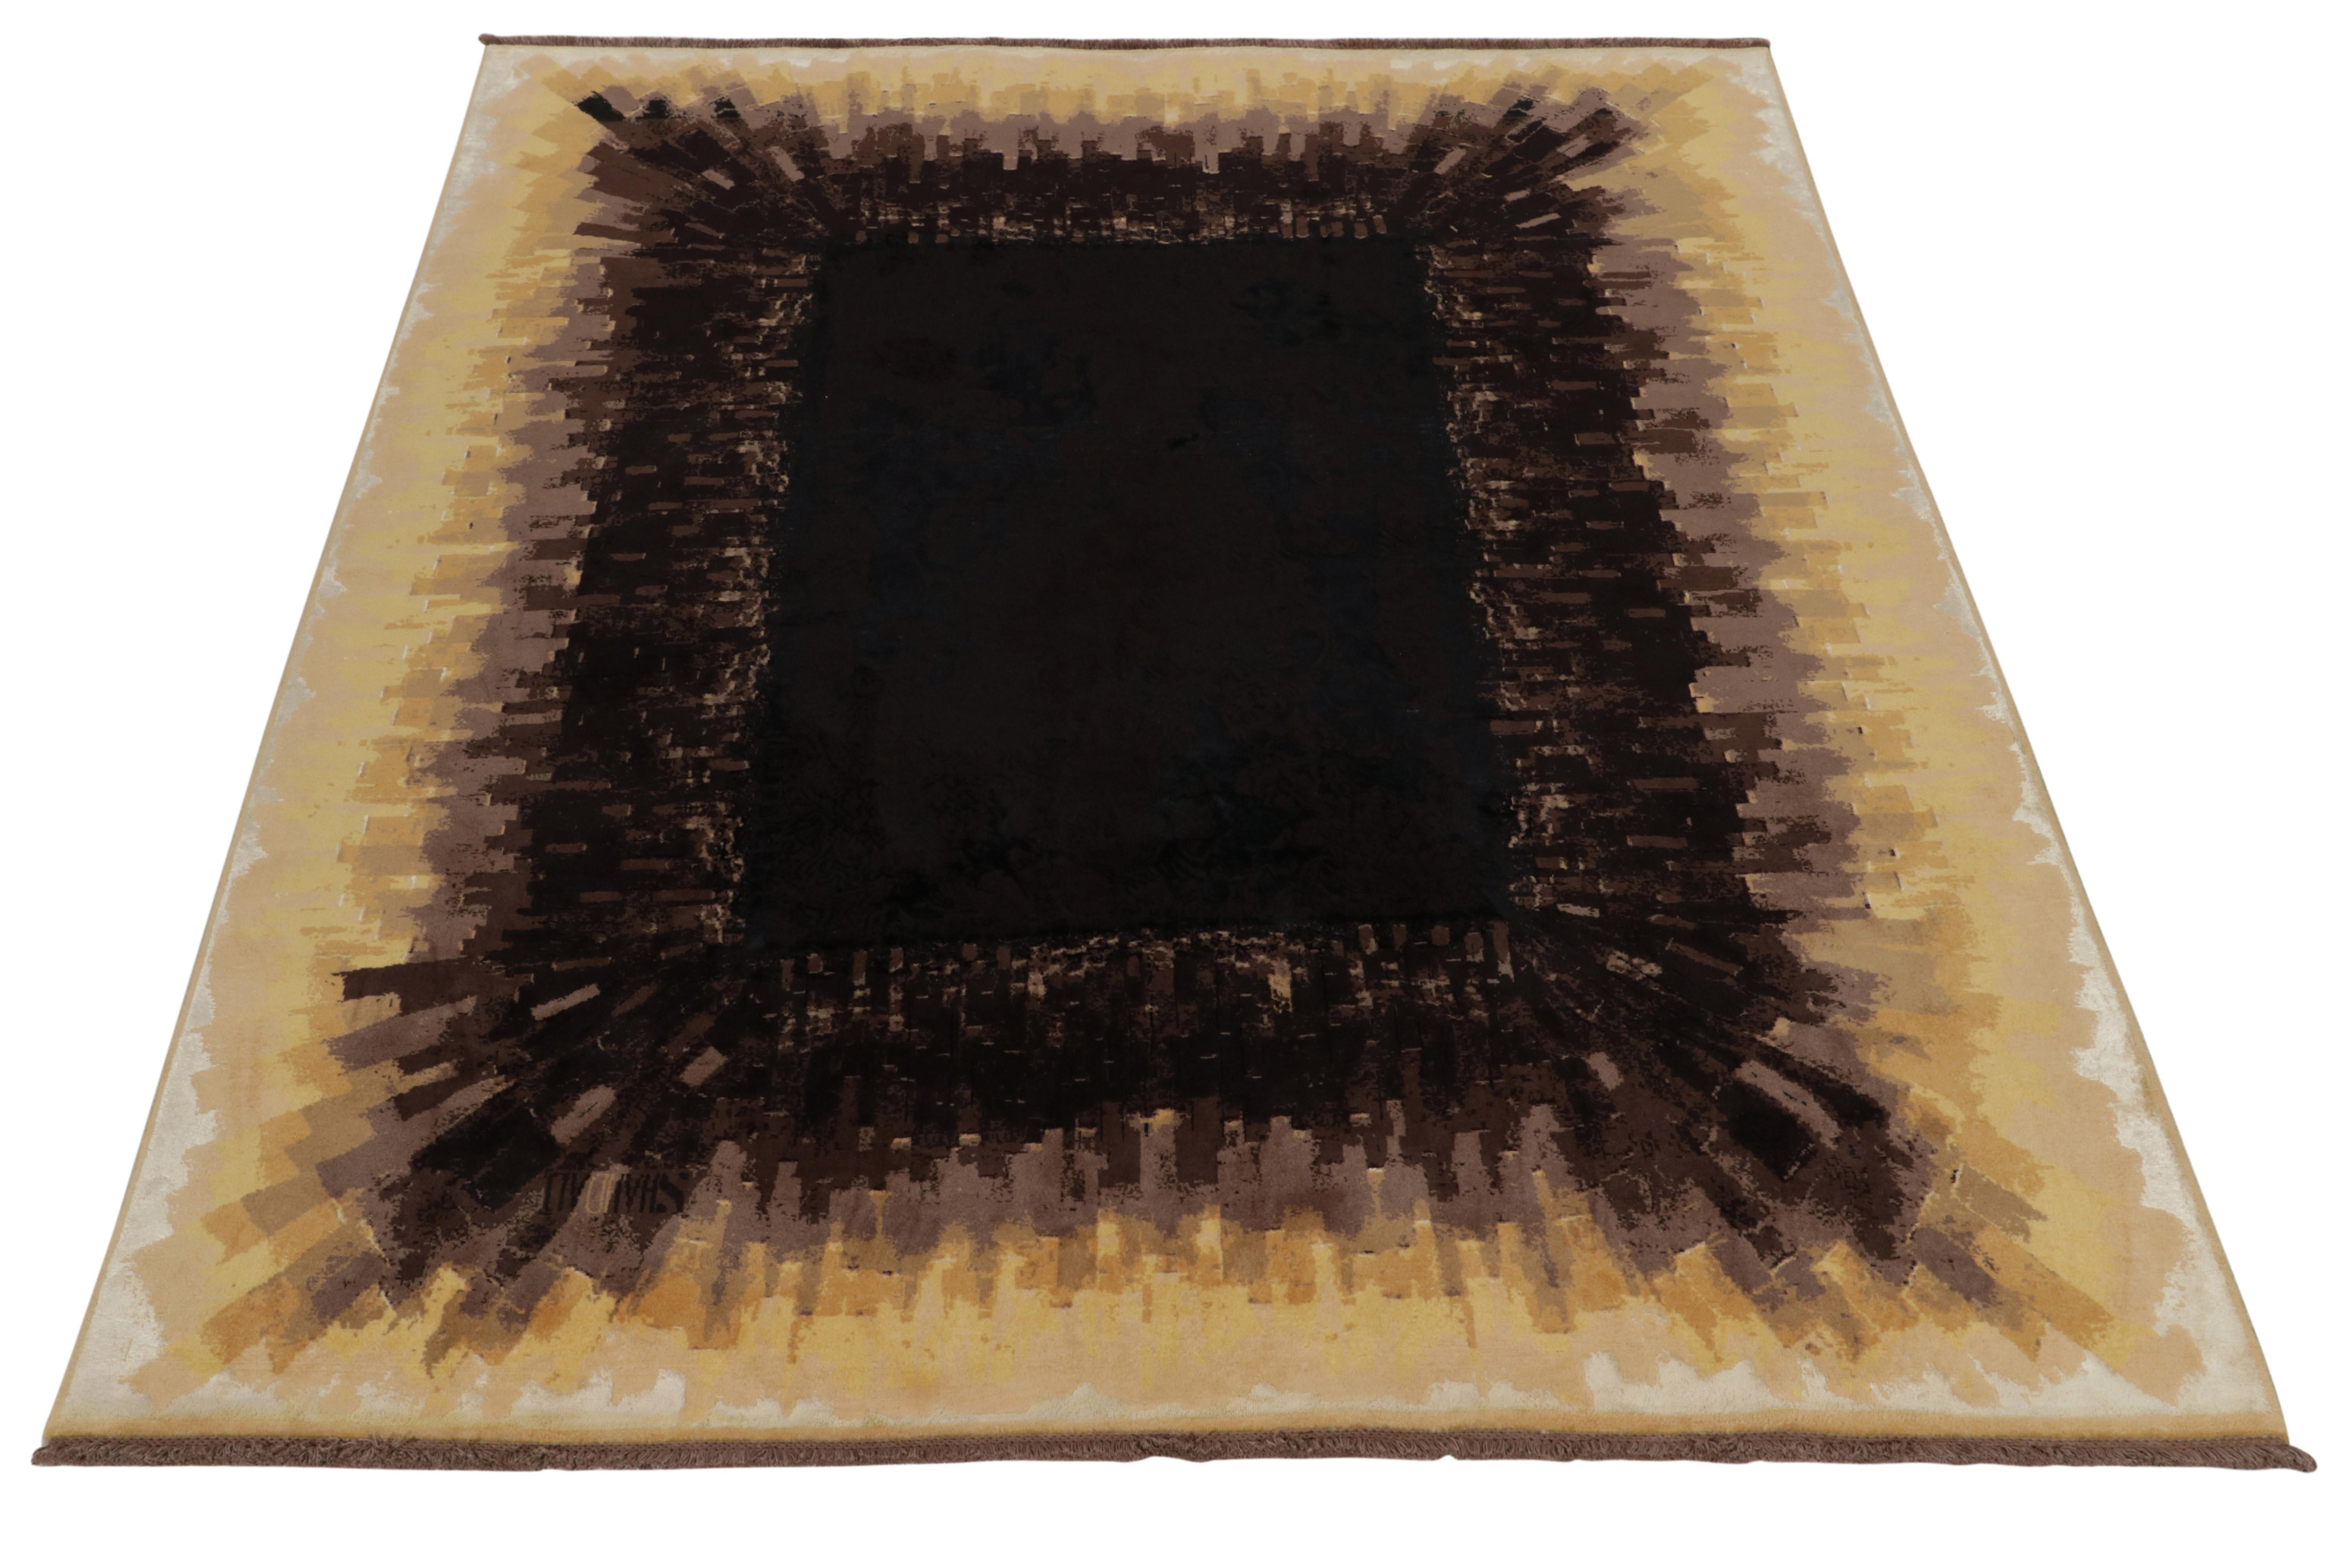 From one of the finest workshops in the world among our principal’s finest new partner ateliers, a bold graphic take on Art Deco pieces and abstraction of the principle of open field rugs. Featuring an artful attitude with painterly brushstrokes in